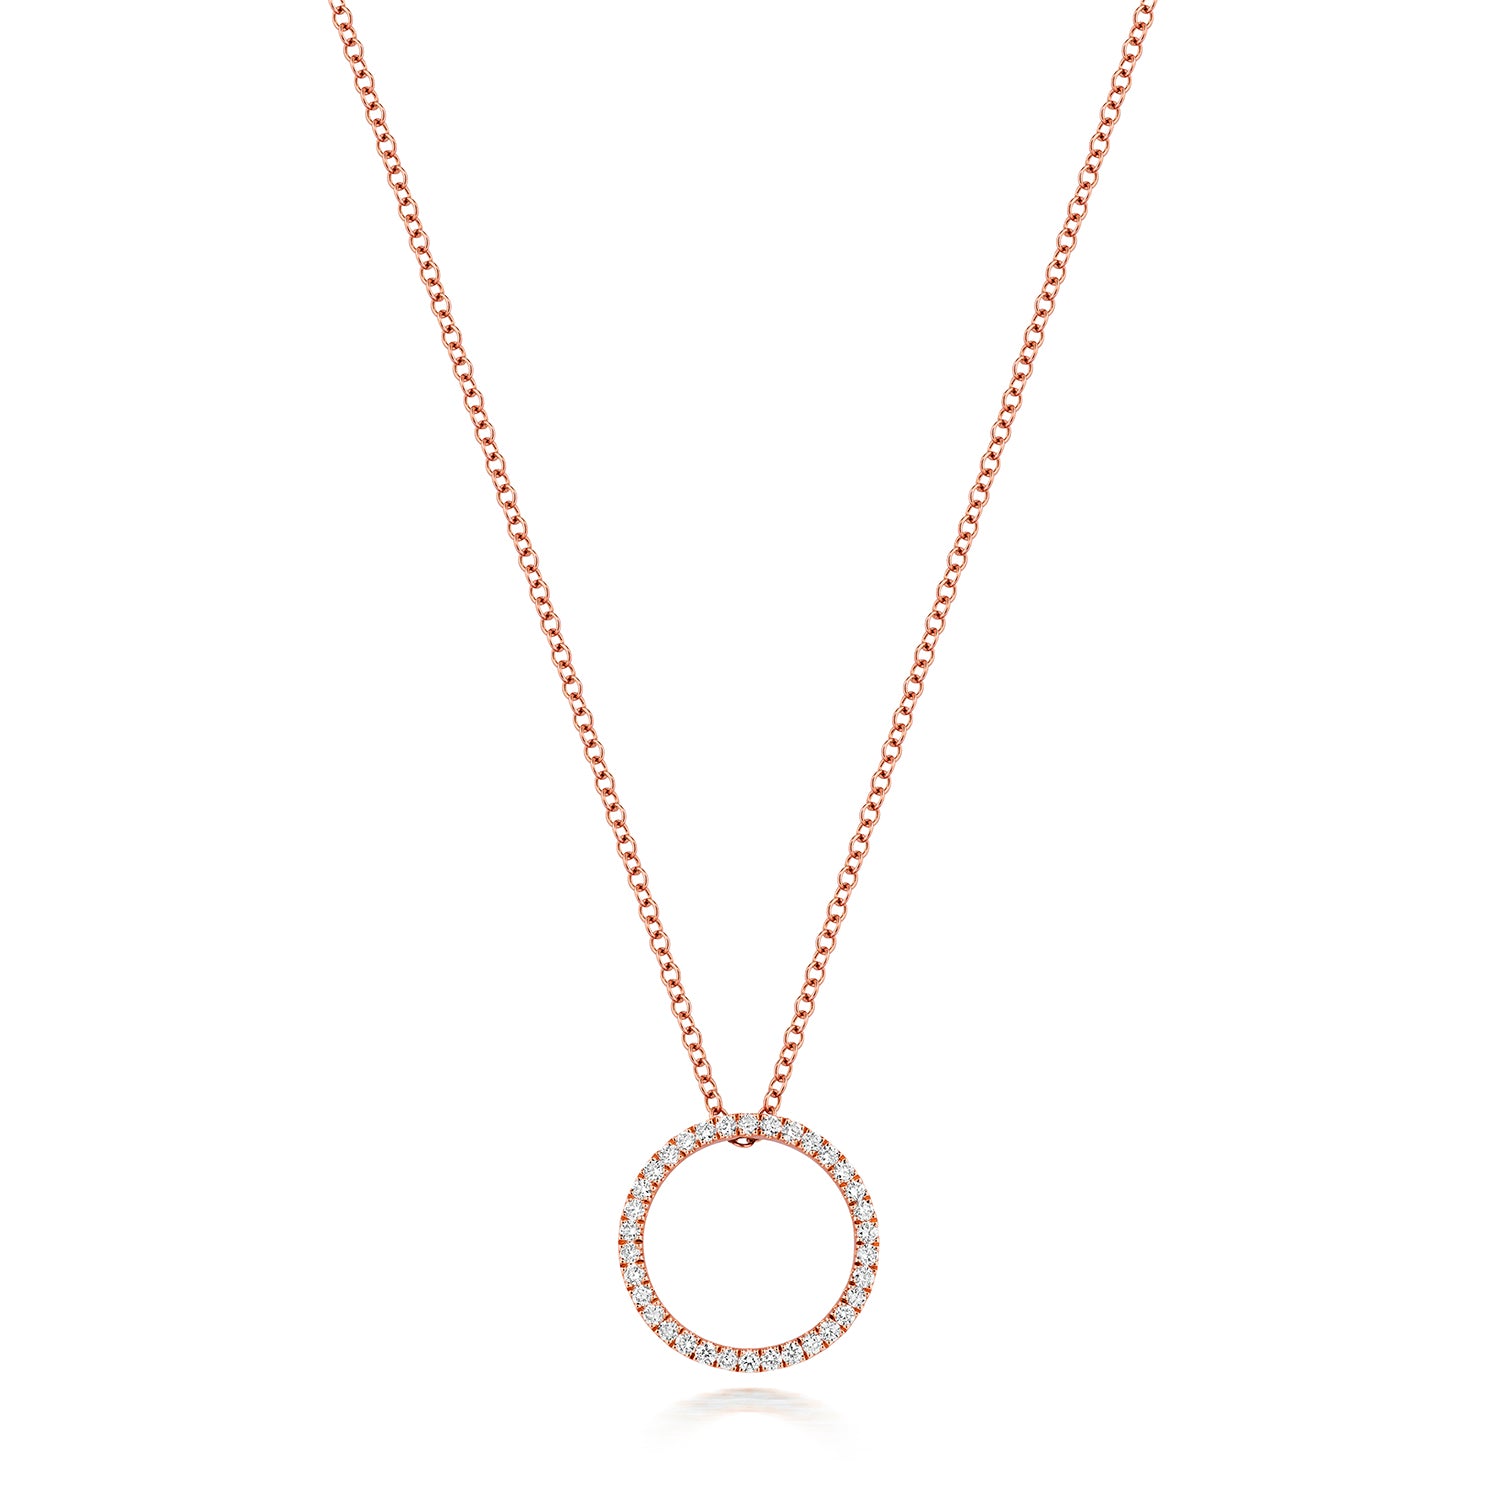 DIAMOND CIRCLE NECKLACE IN 18CT ROSE GOLD